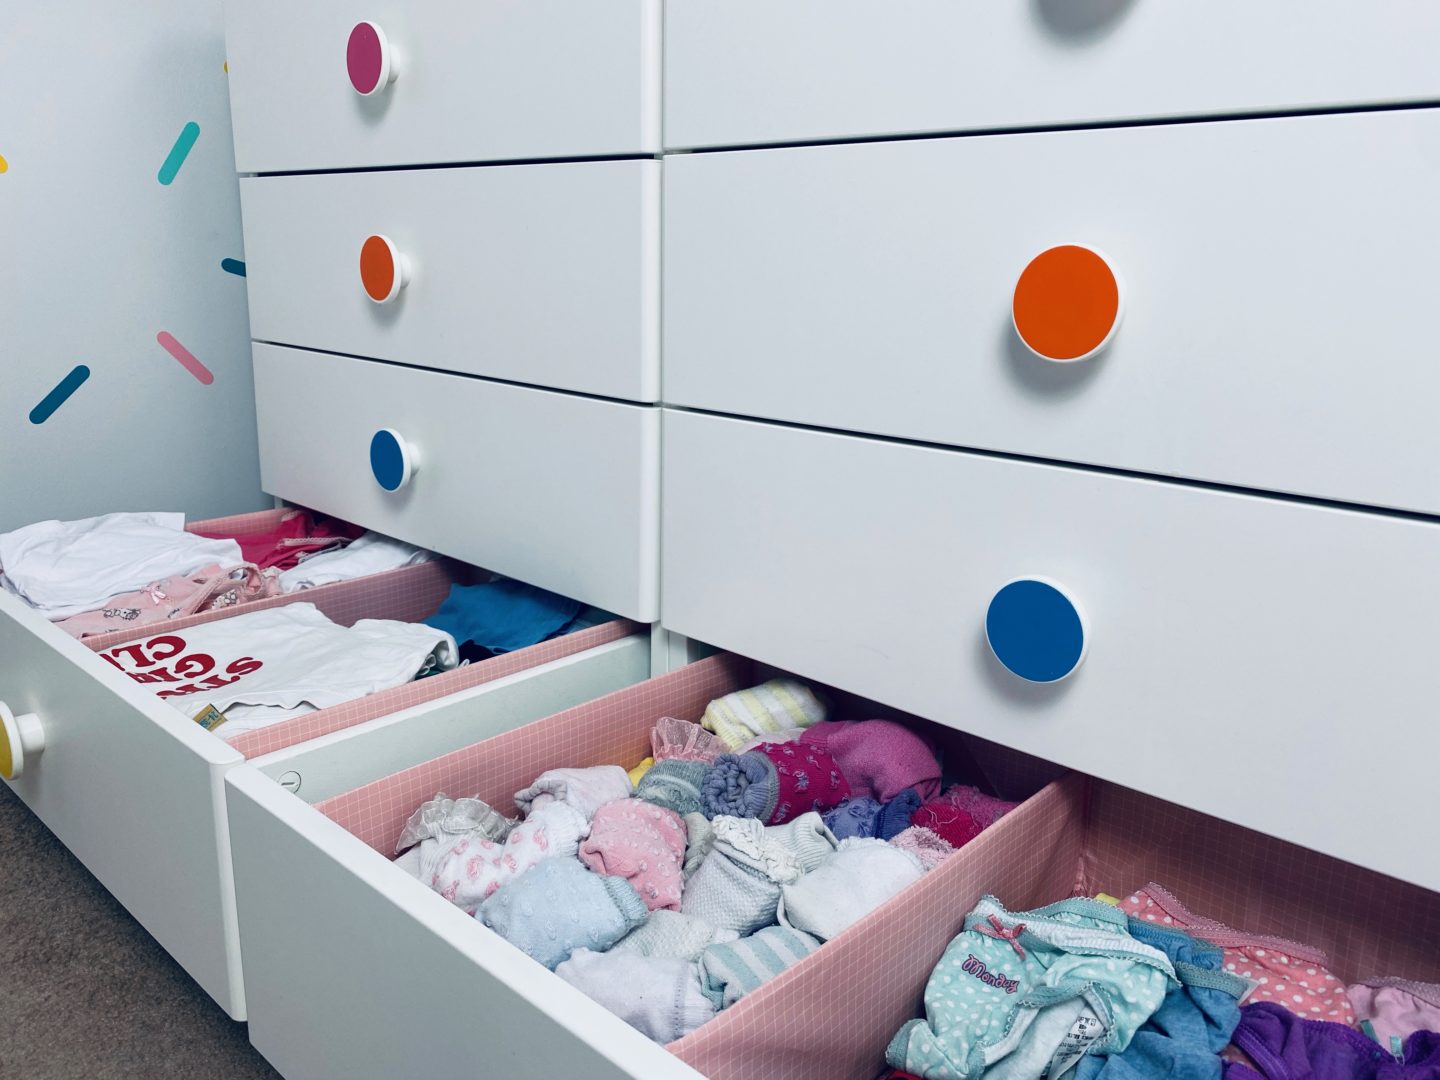 AD: Taking back control of mornings for only £51.75 with IKEA organisation hacks. Kid's drawer post organisation. 